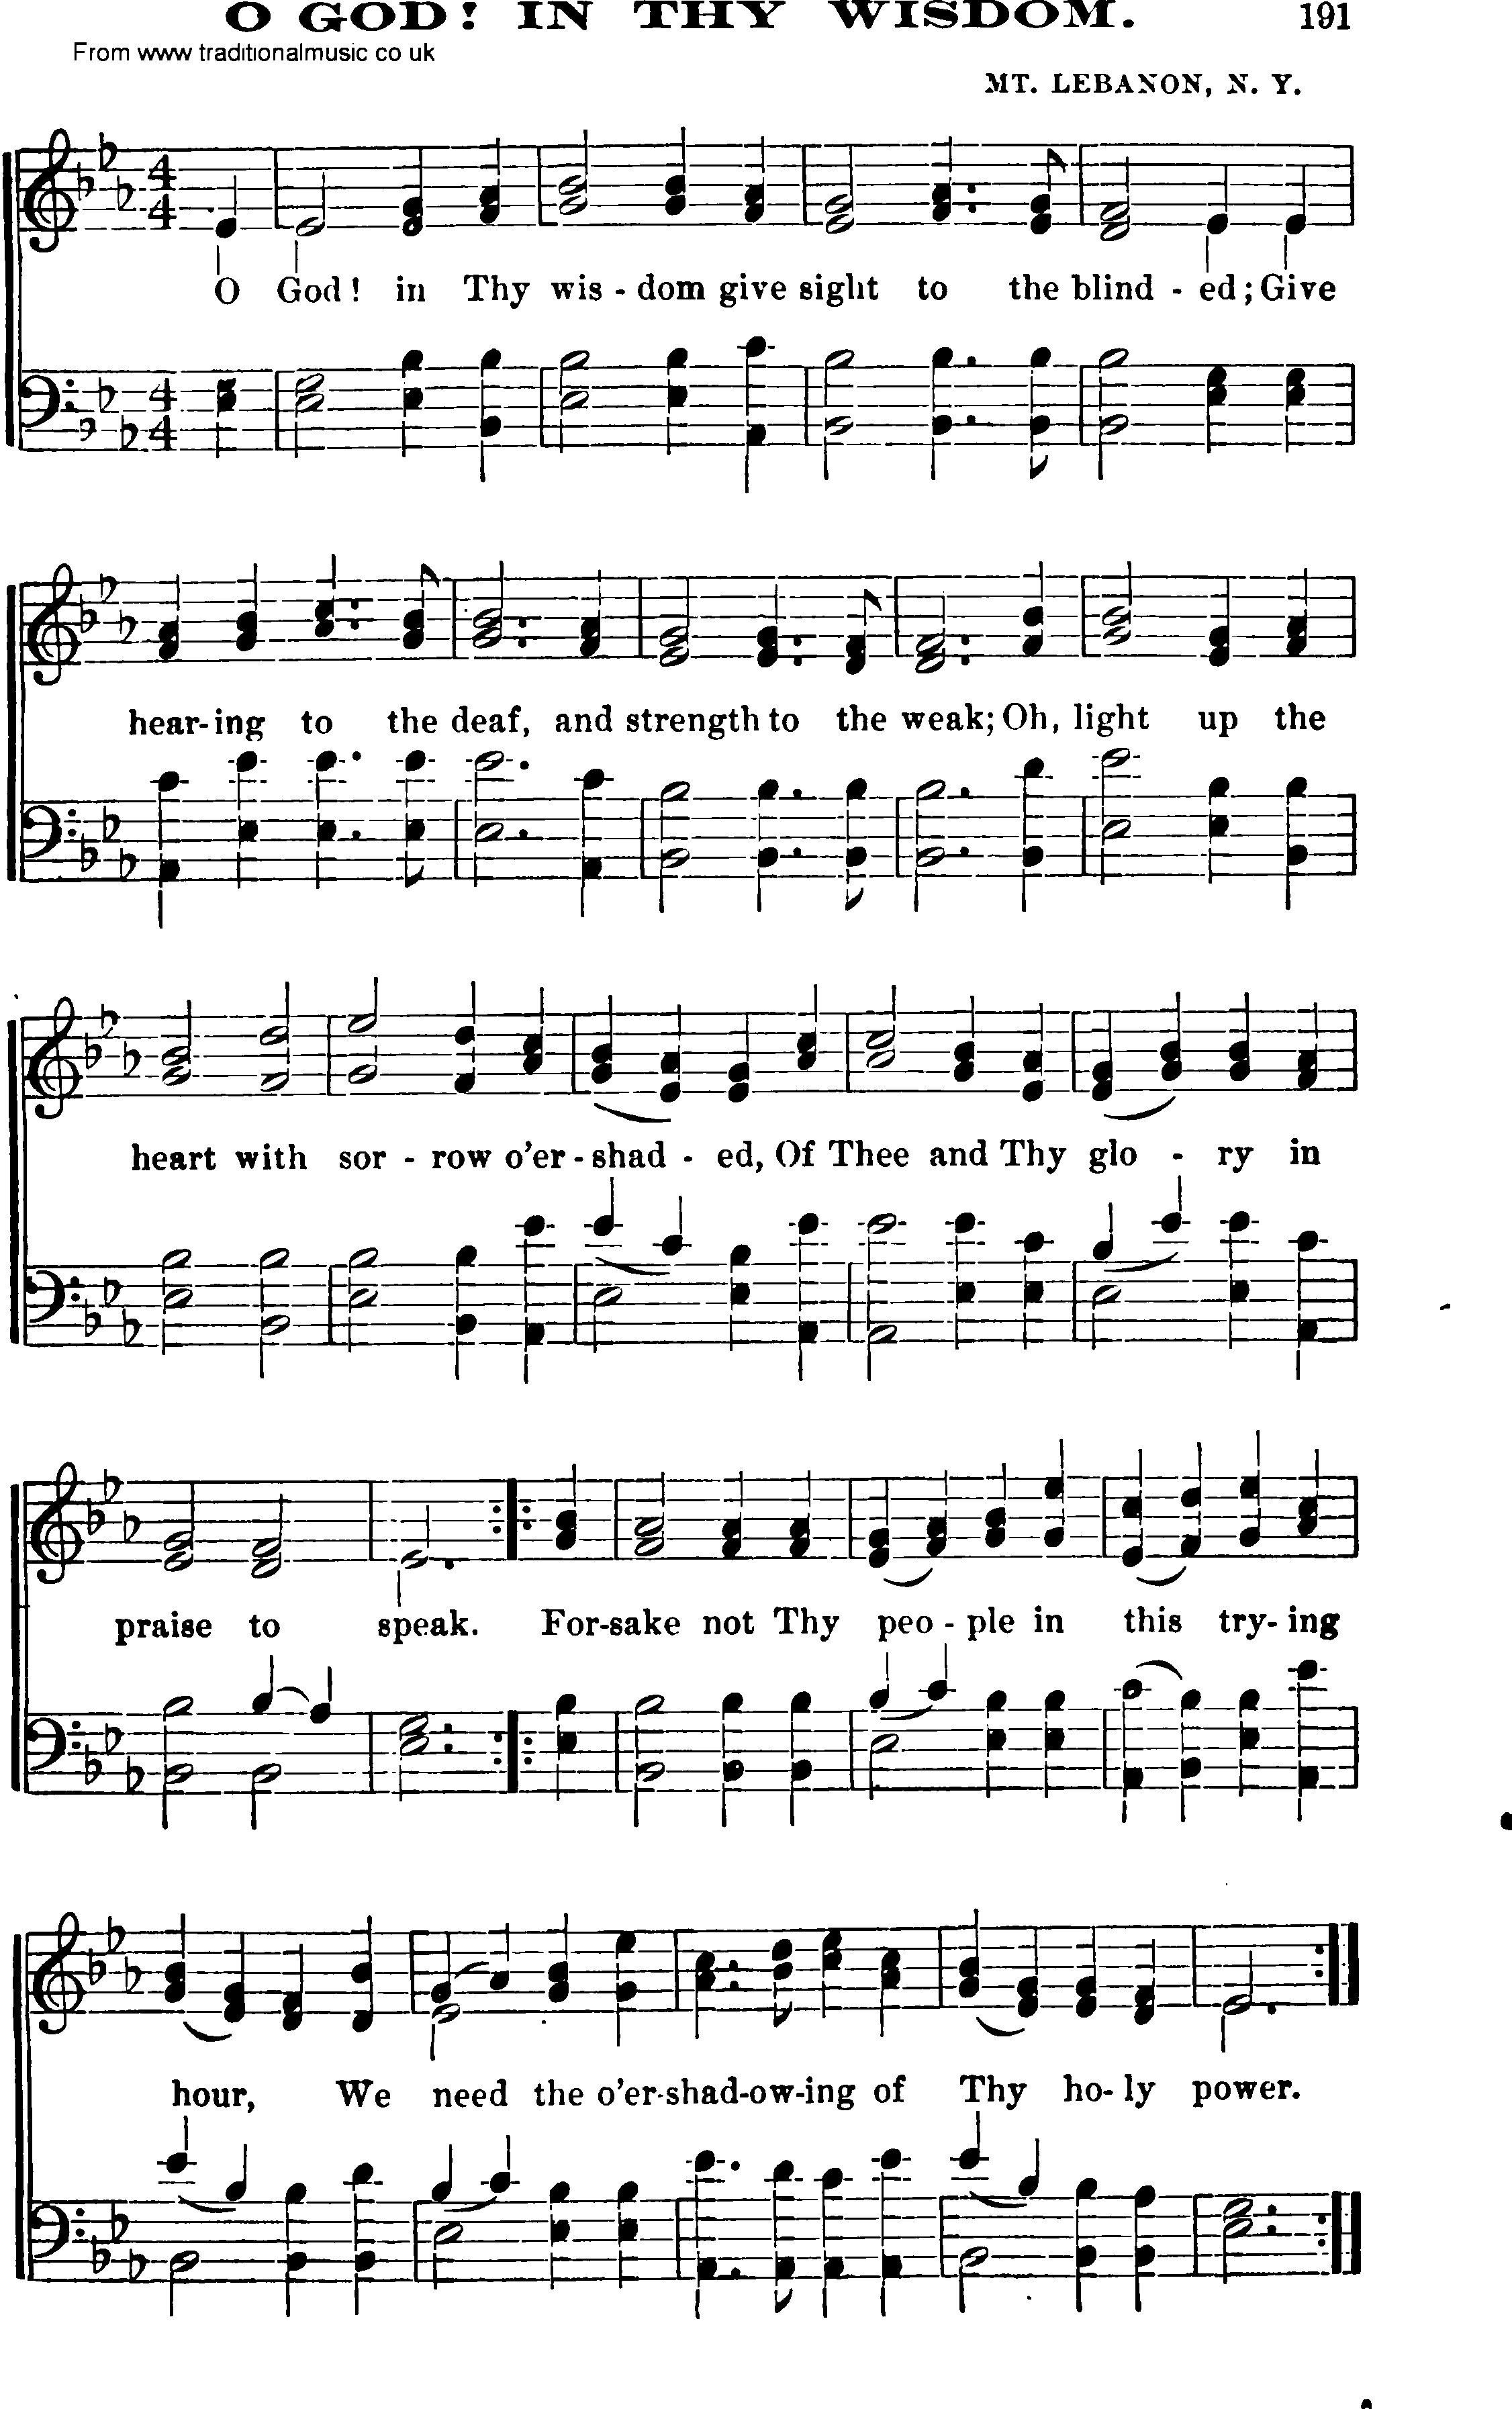 Shaker Music collection, Hymn: O God, In Thy Wisdom, sheetmusic and PDF